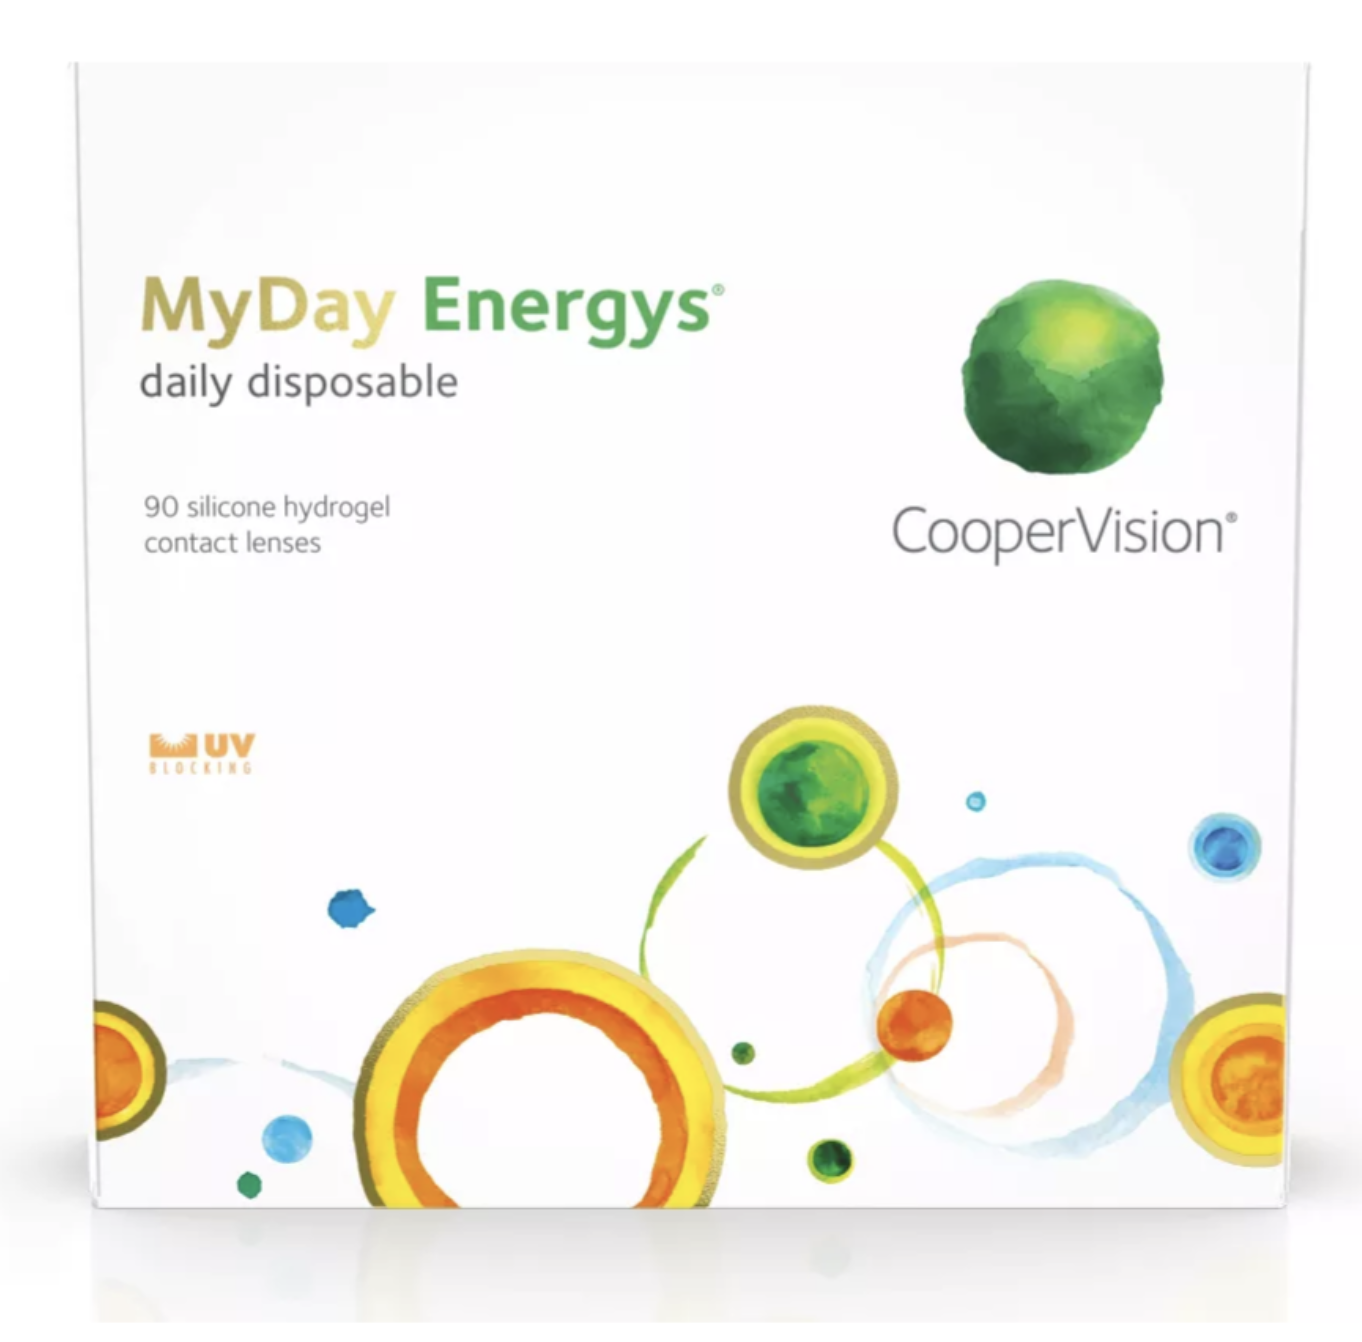 MyDay Energys daily disposable CLs are designed to reduce eye strain and keep lenses hydrated. 